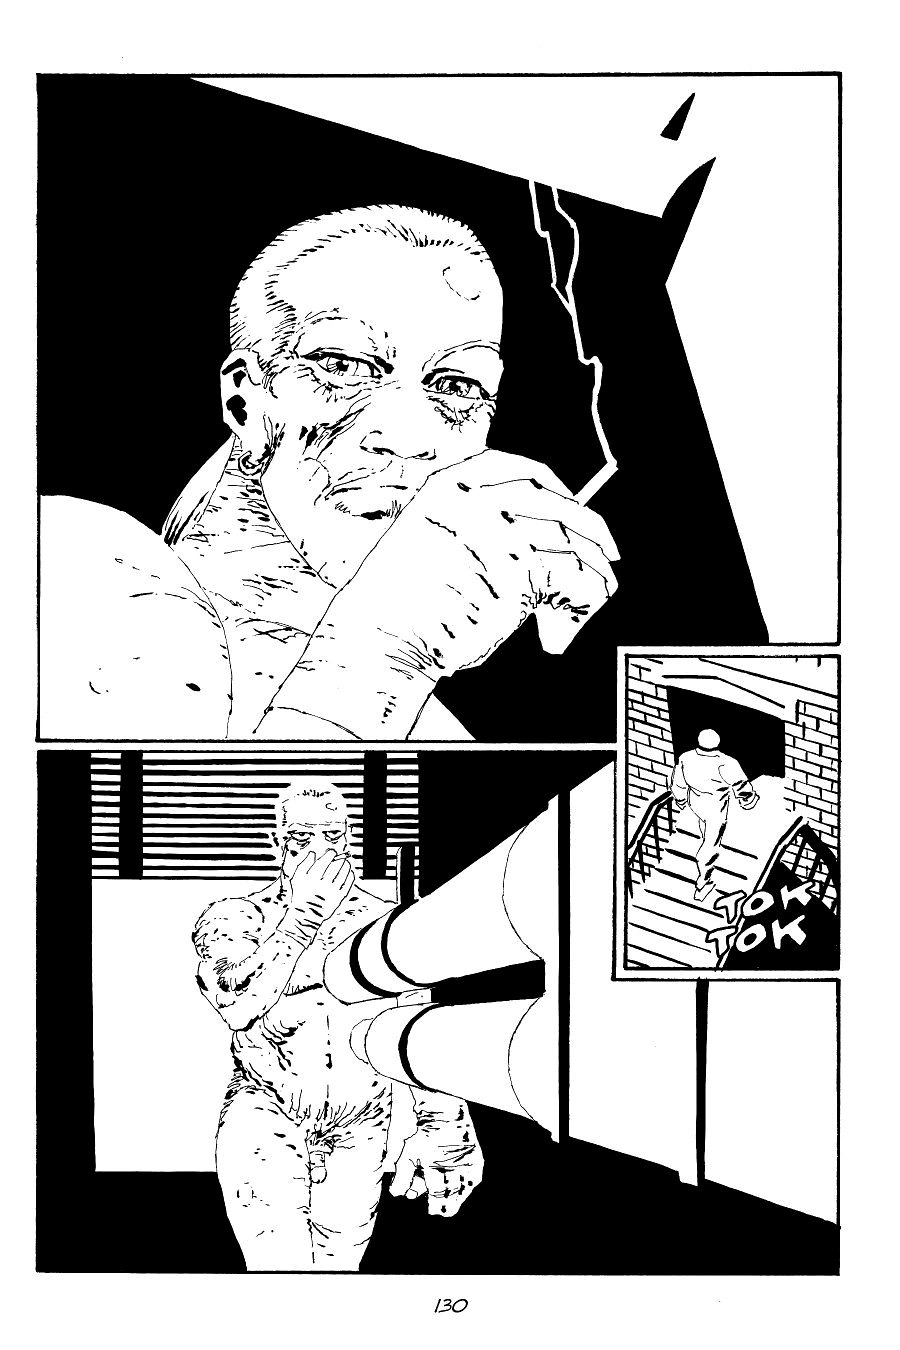 page 130 of sin city 7 hell and back